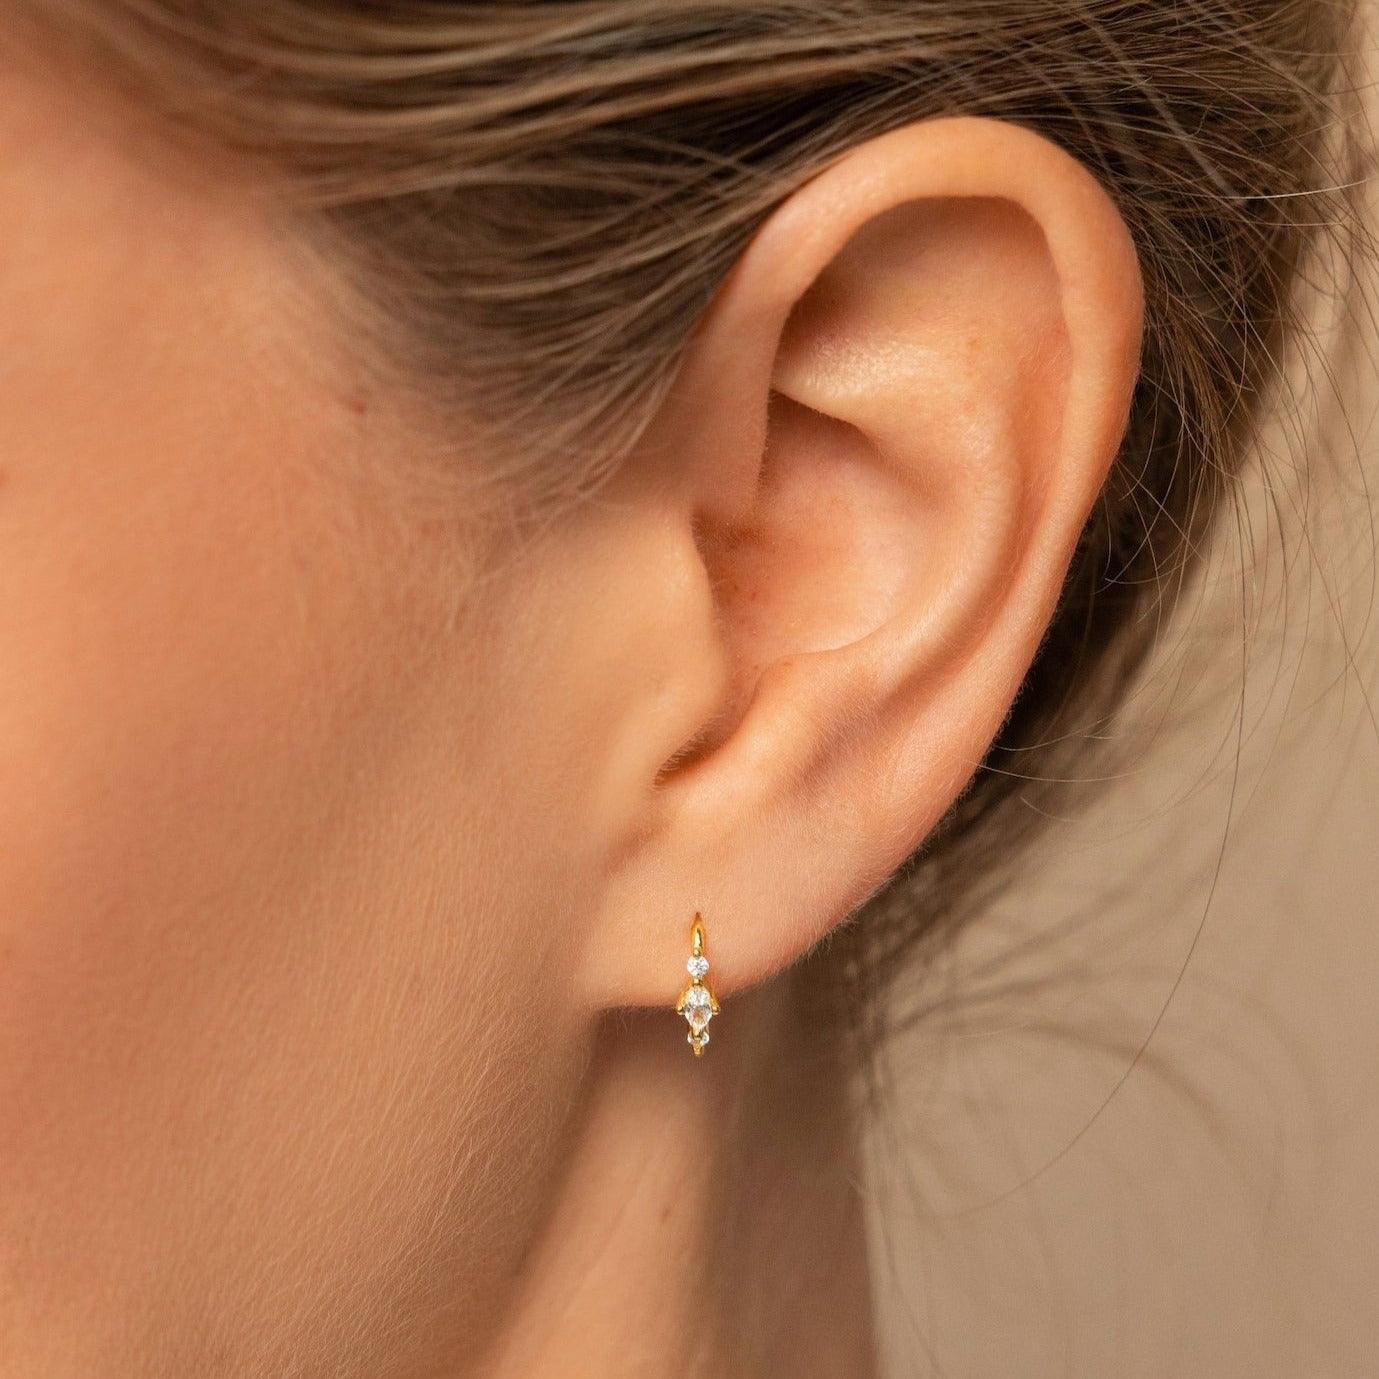 7 Marquises Diamond Earring Backing in 18K Gold